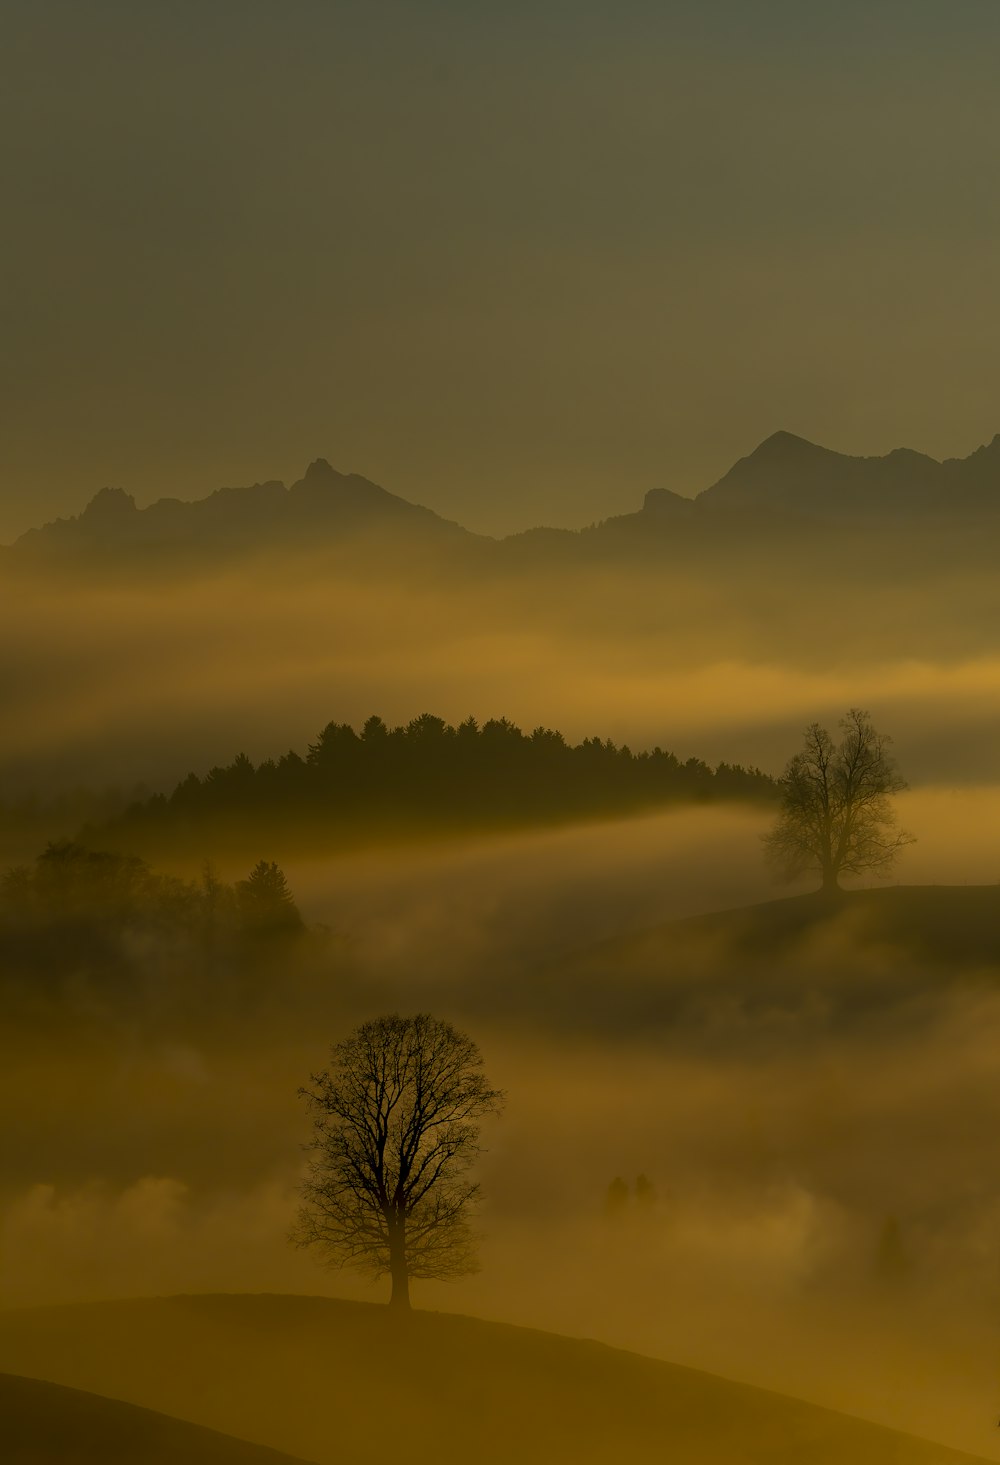 mist and mountains